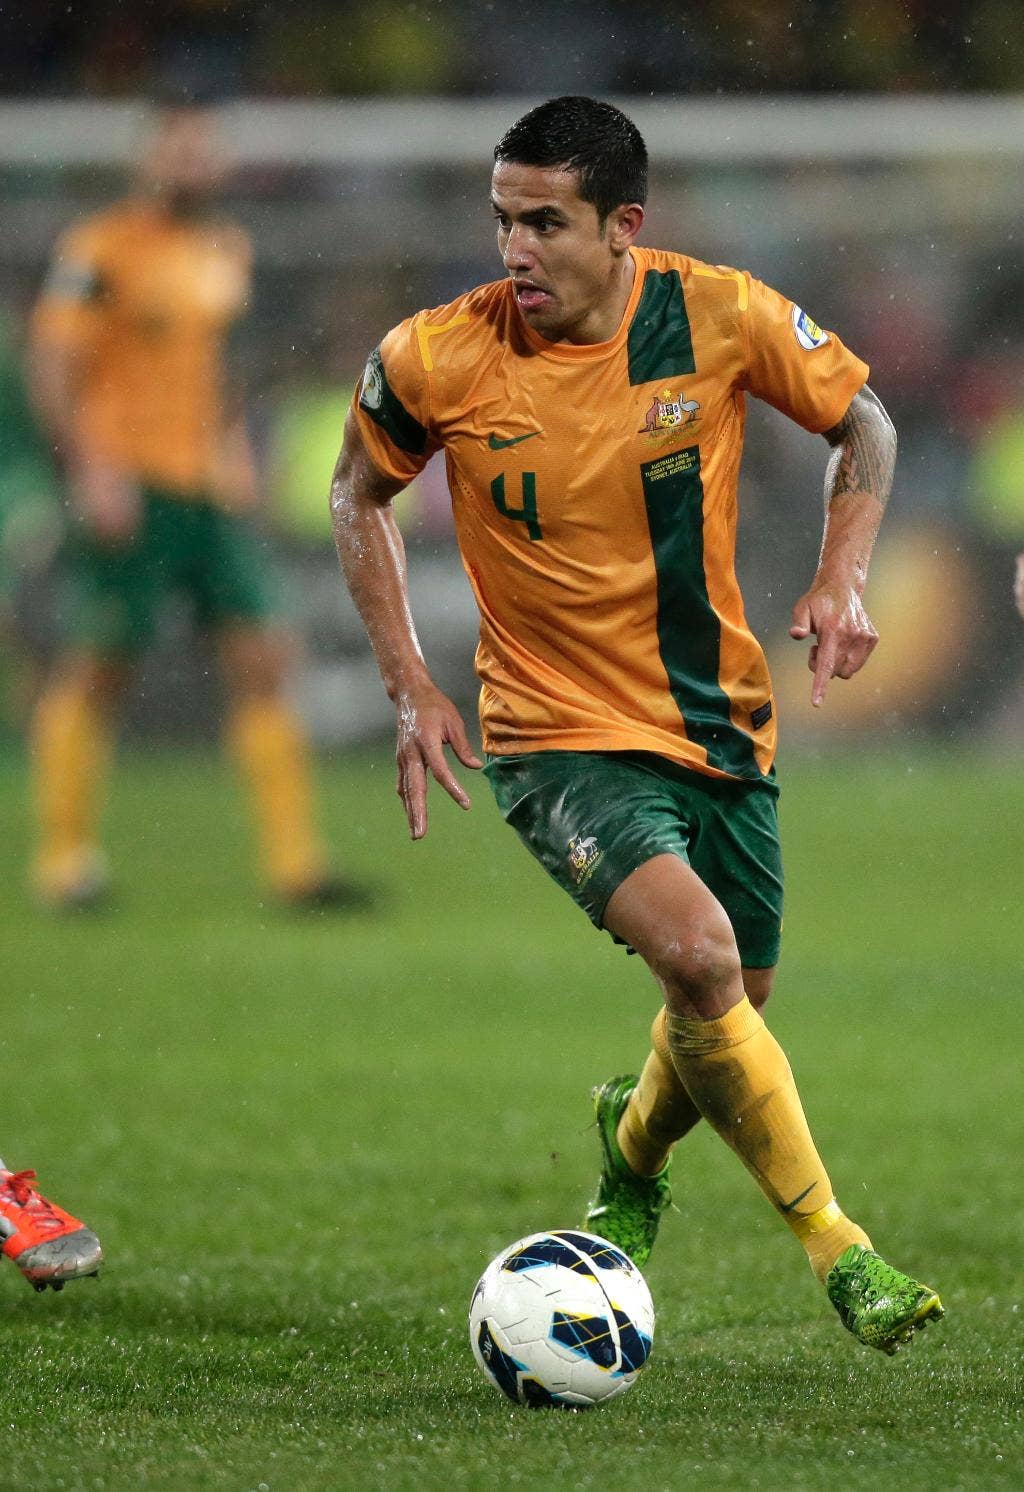 WORLD CUP 2014: 5 Australia players to watch at the World Cup | Fox News